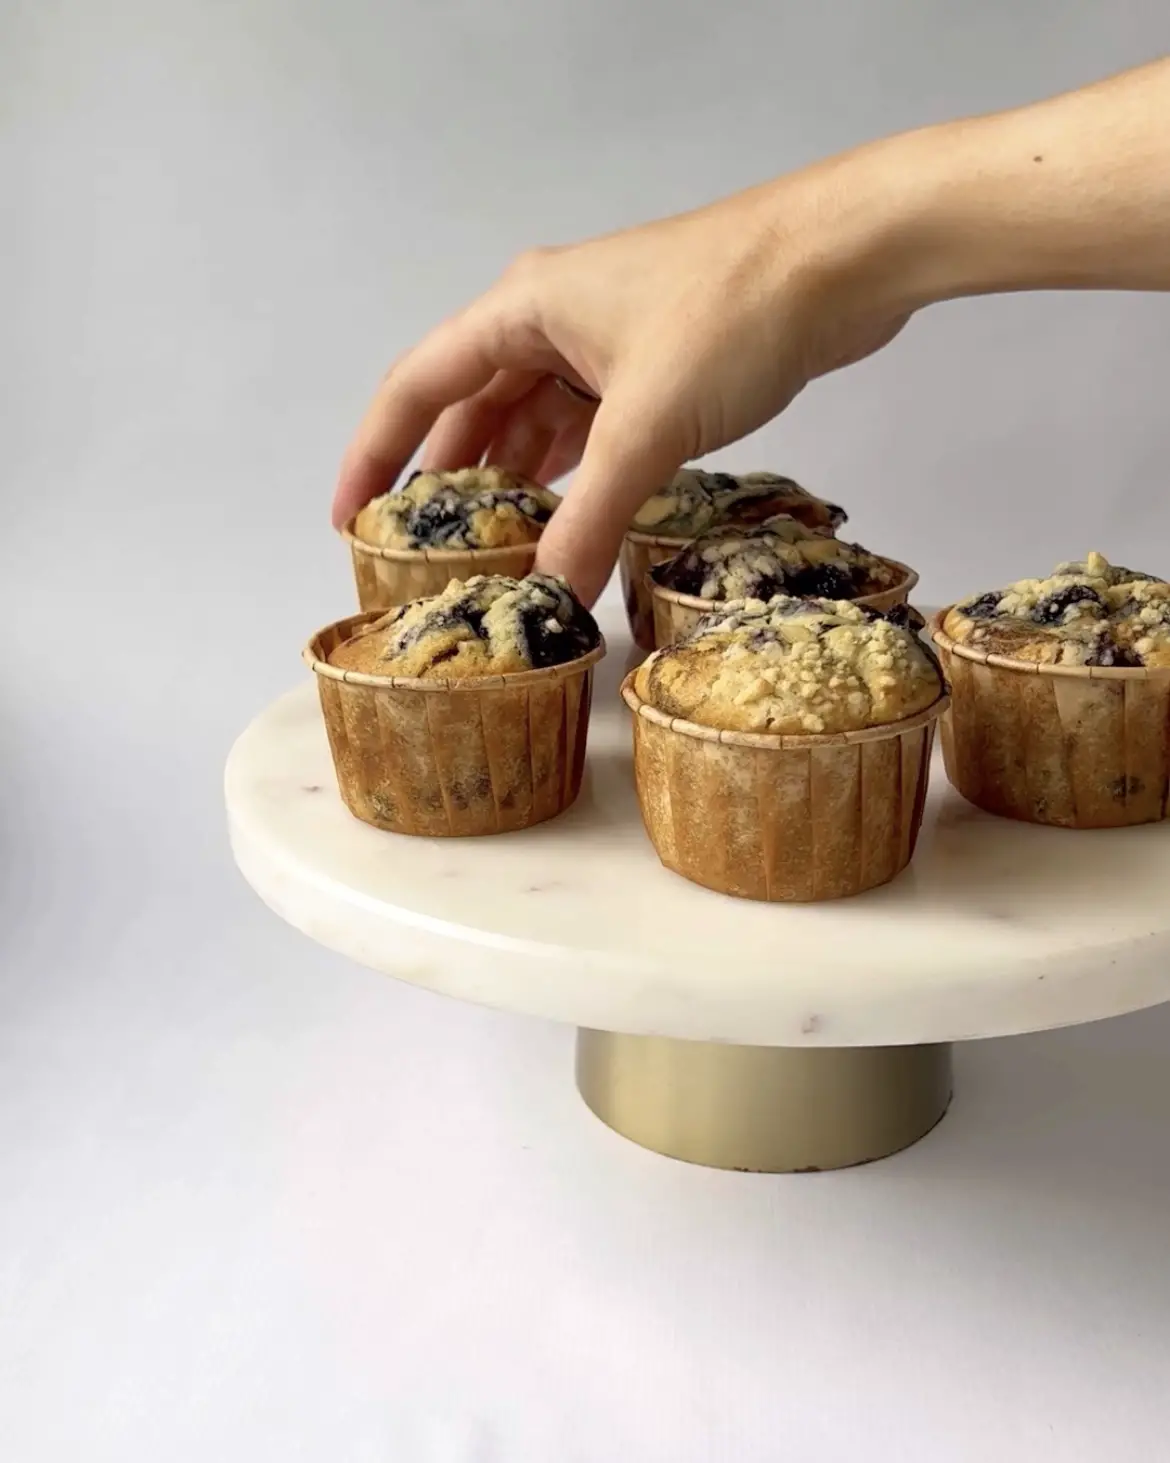 bake the blueberry crumble muffins